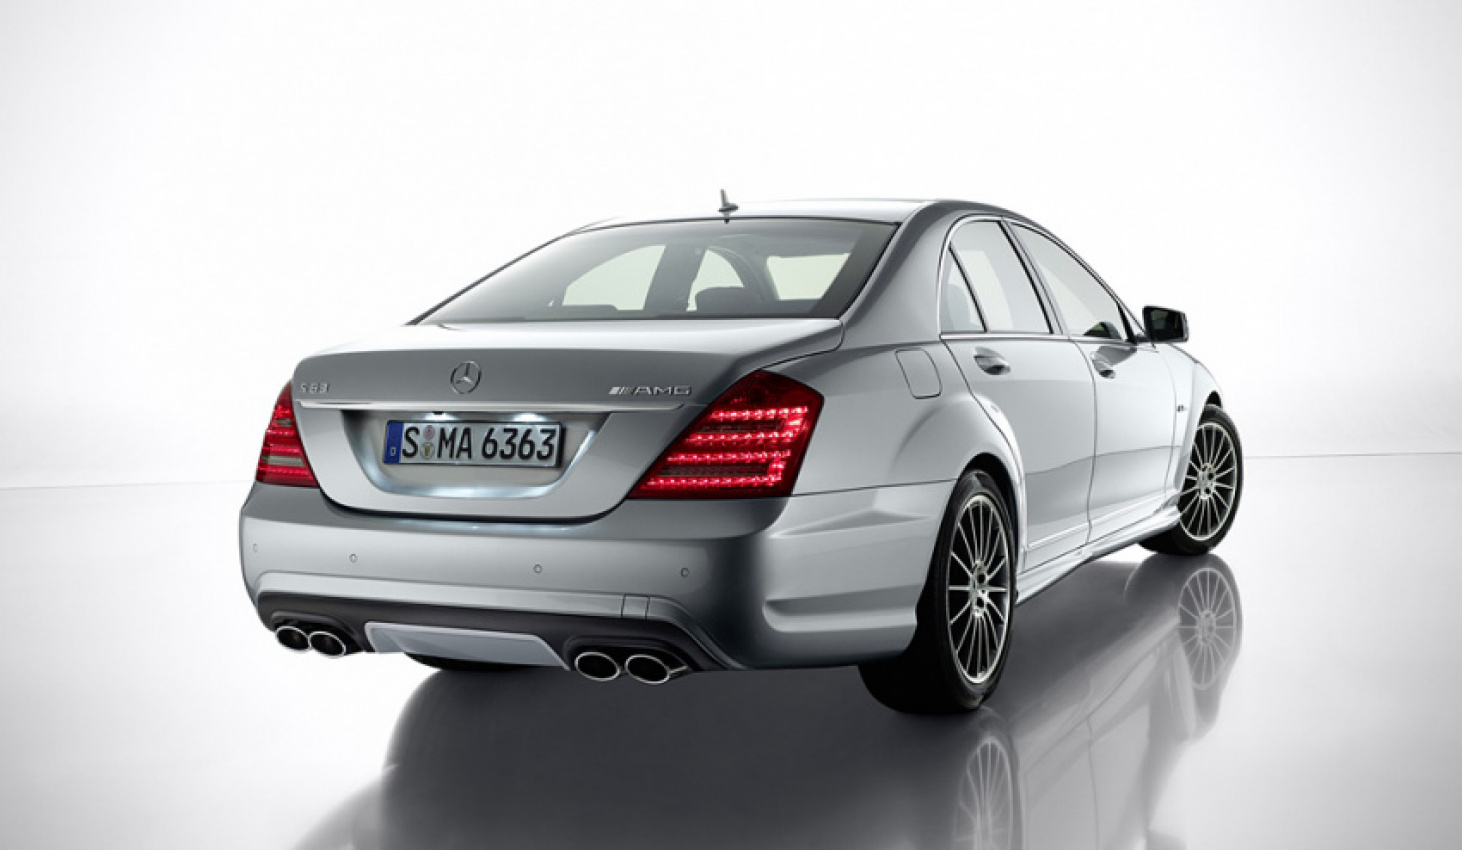 autos, cars, mercedes-benz, mg, review, 2010s cars, amg, amg model in depth, mercedes, mercedes amg, mercedes-benz model in depth, 2010 mercedes-benz s 63 amg